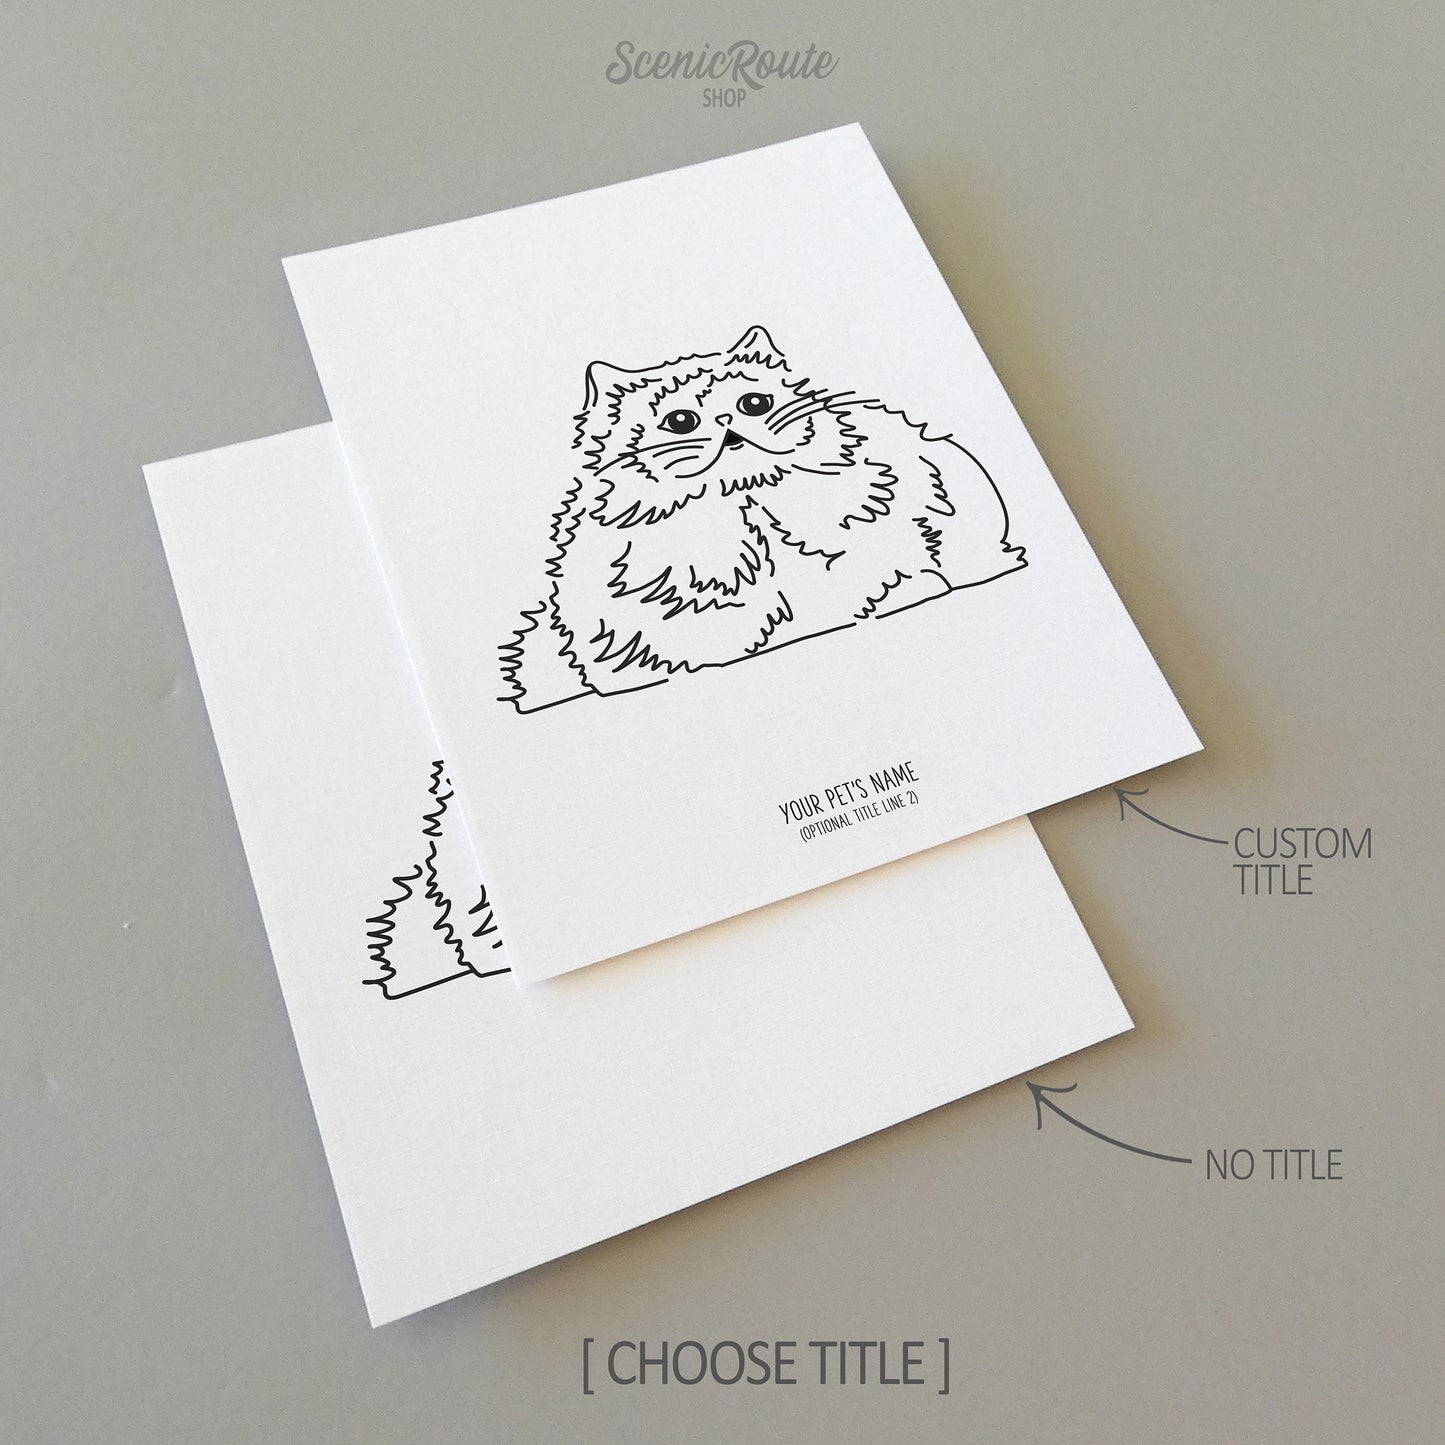 Two line art drawings of a Himalayan Cat on white linen paper with a gray background.  The pieces are shown with “No Title” and “Custom Title” options for the available art print options.